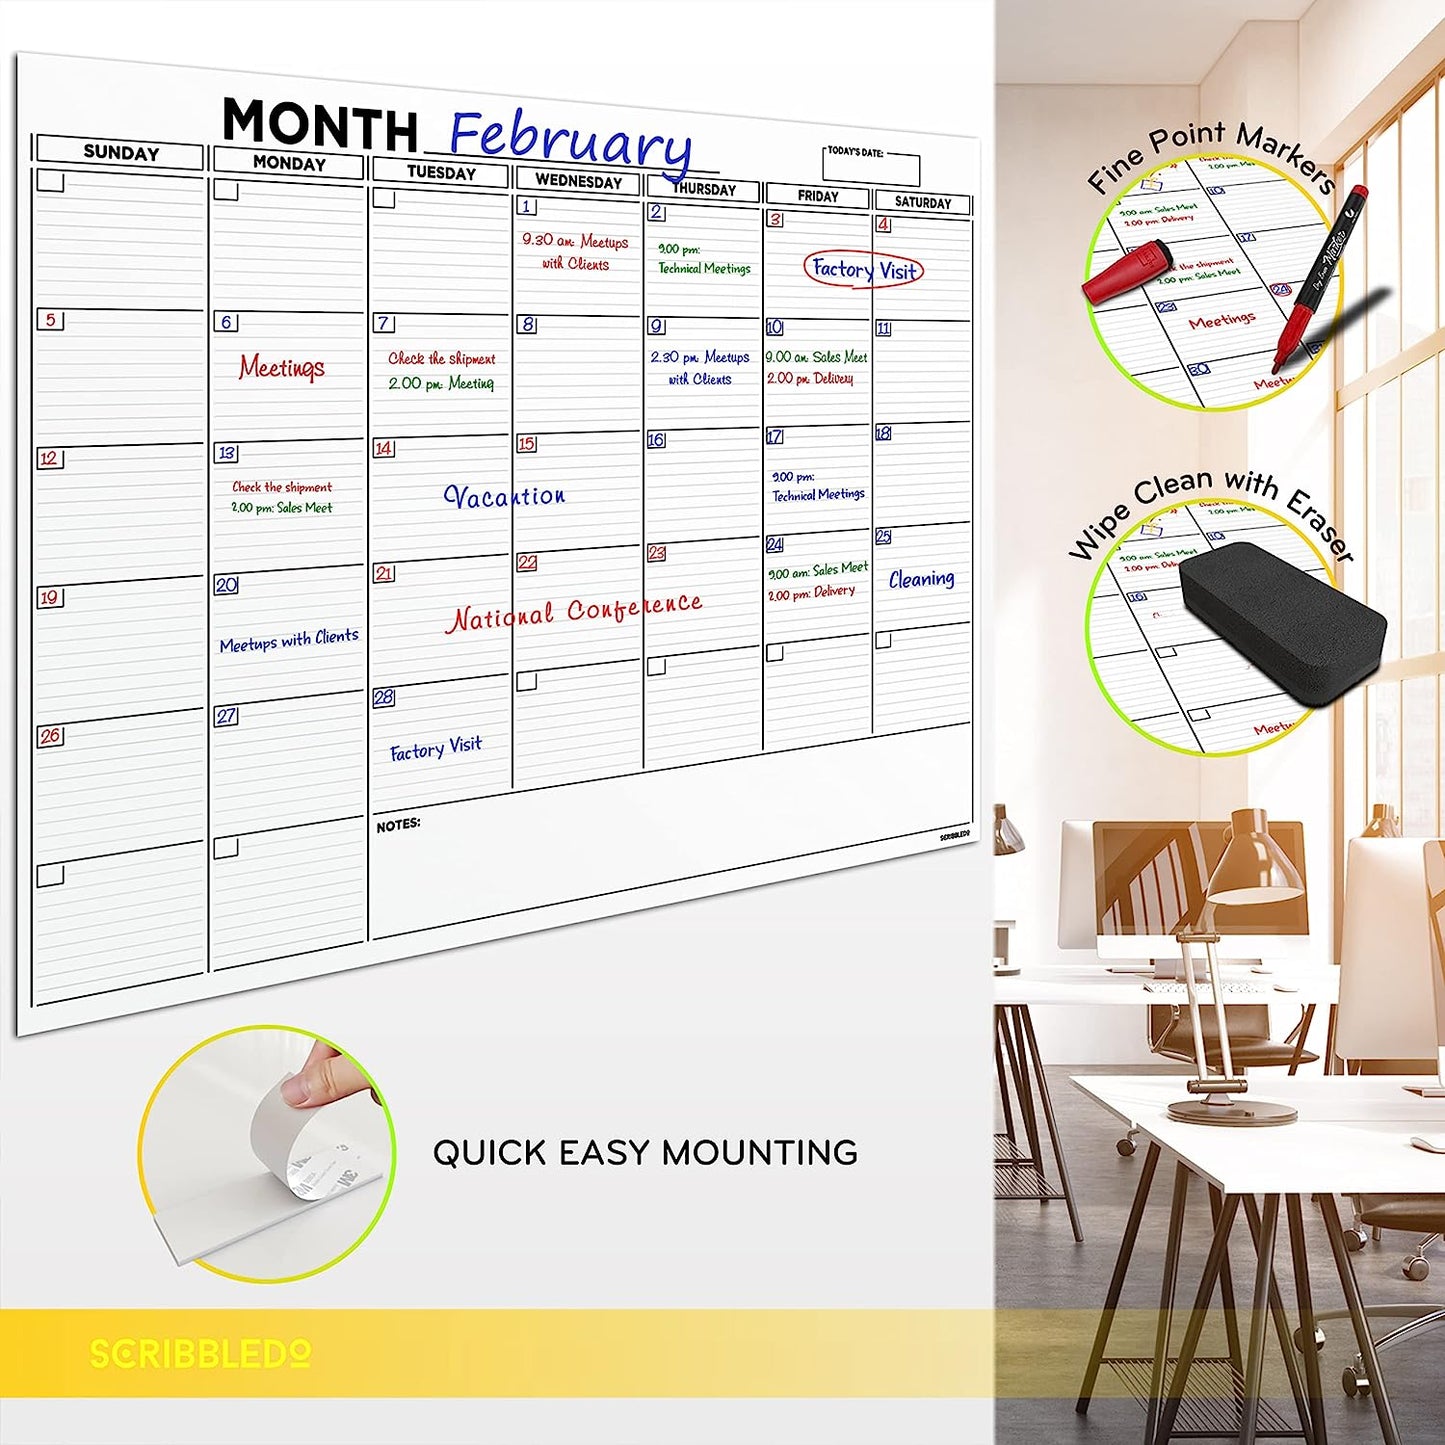 giant extra large dry erase calendar board for wall